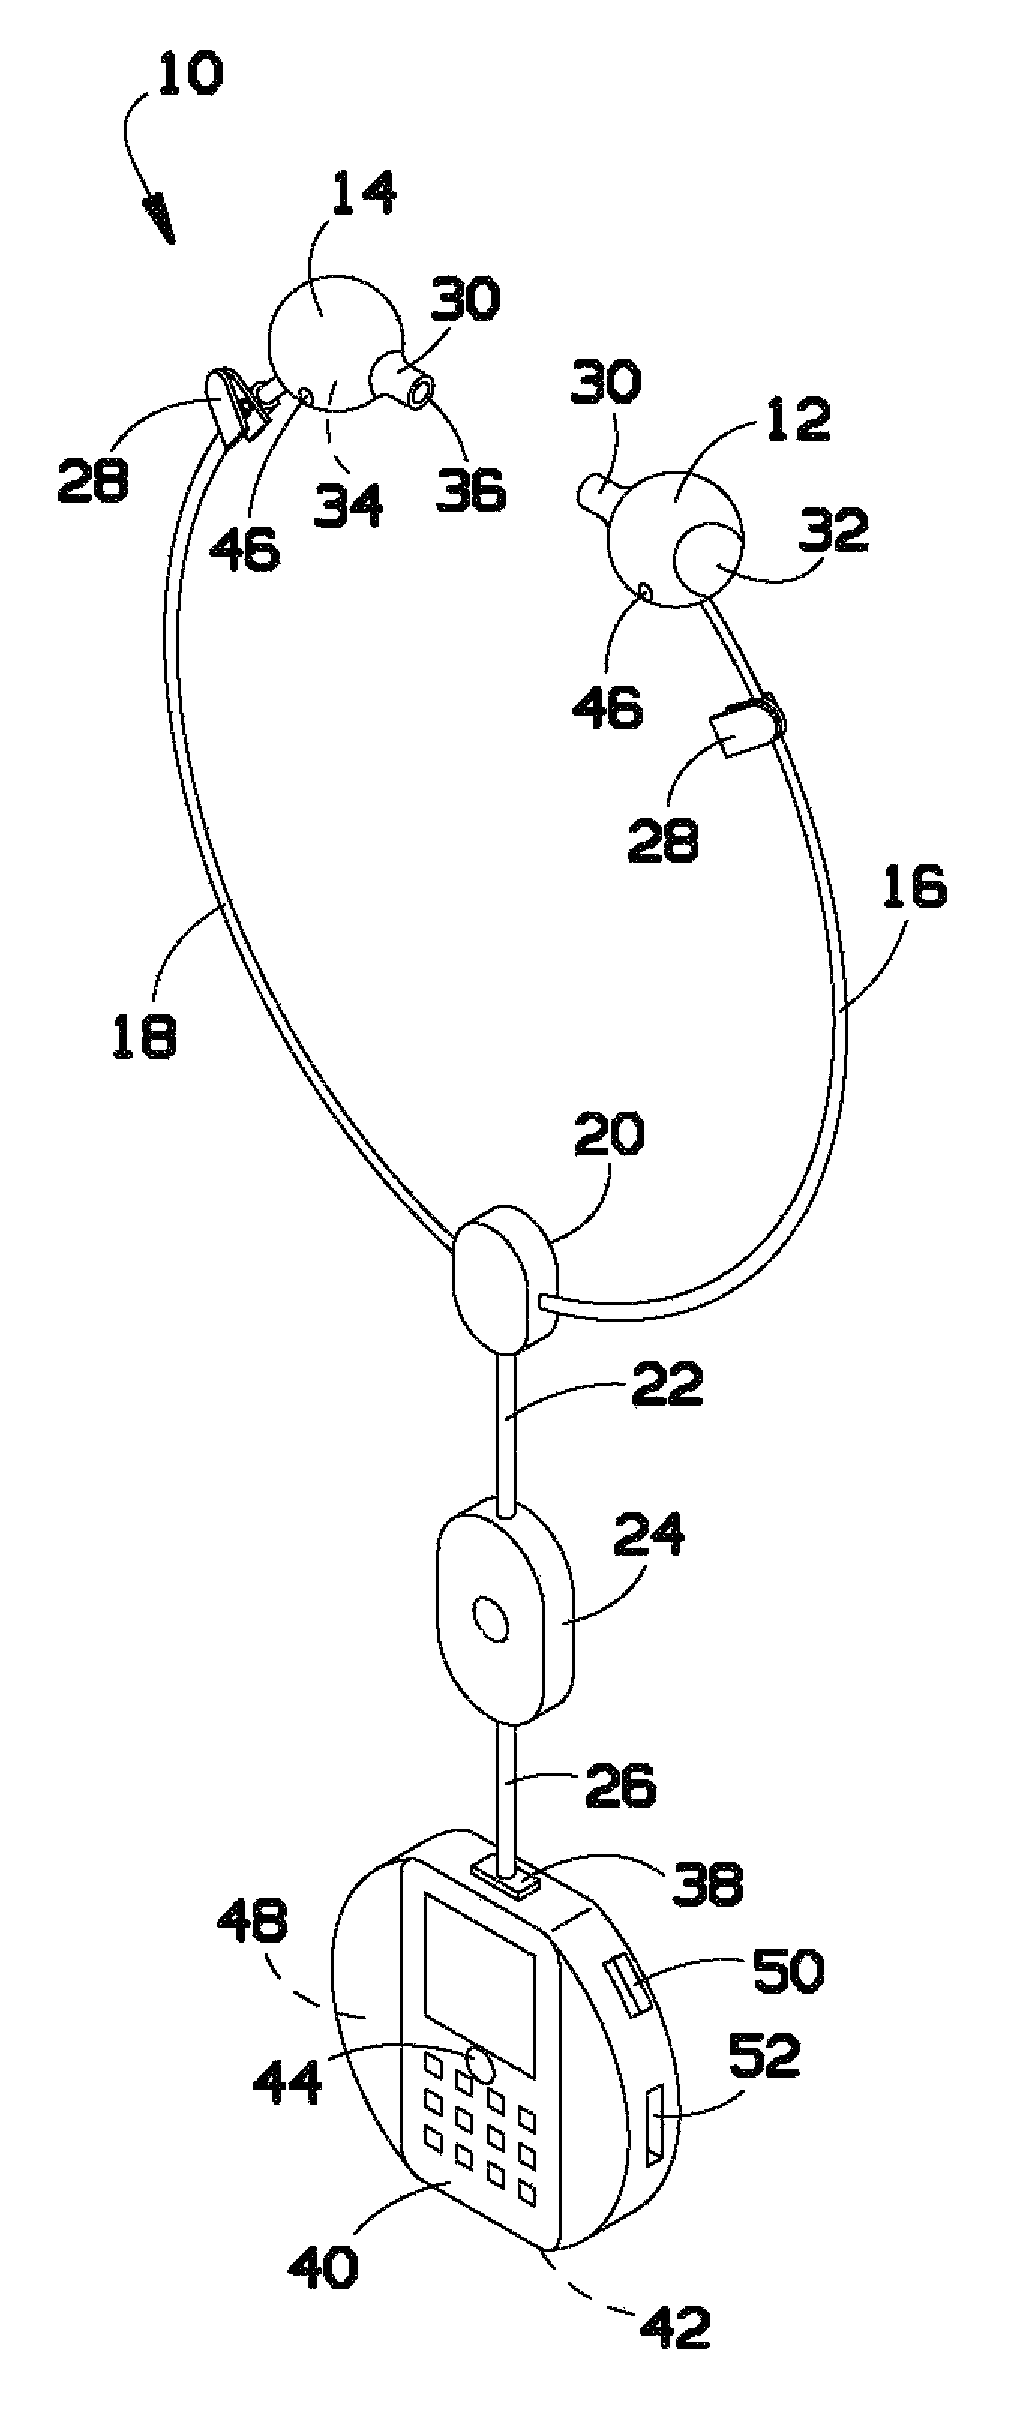 Ear ailment diagnostic device and method